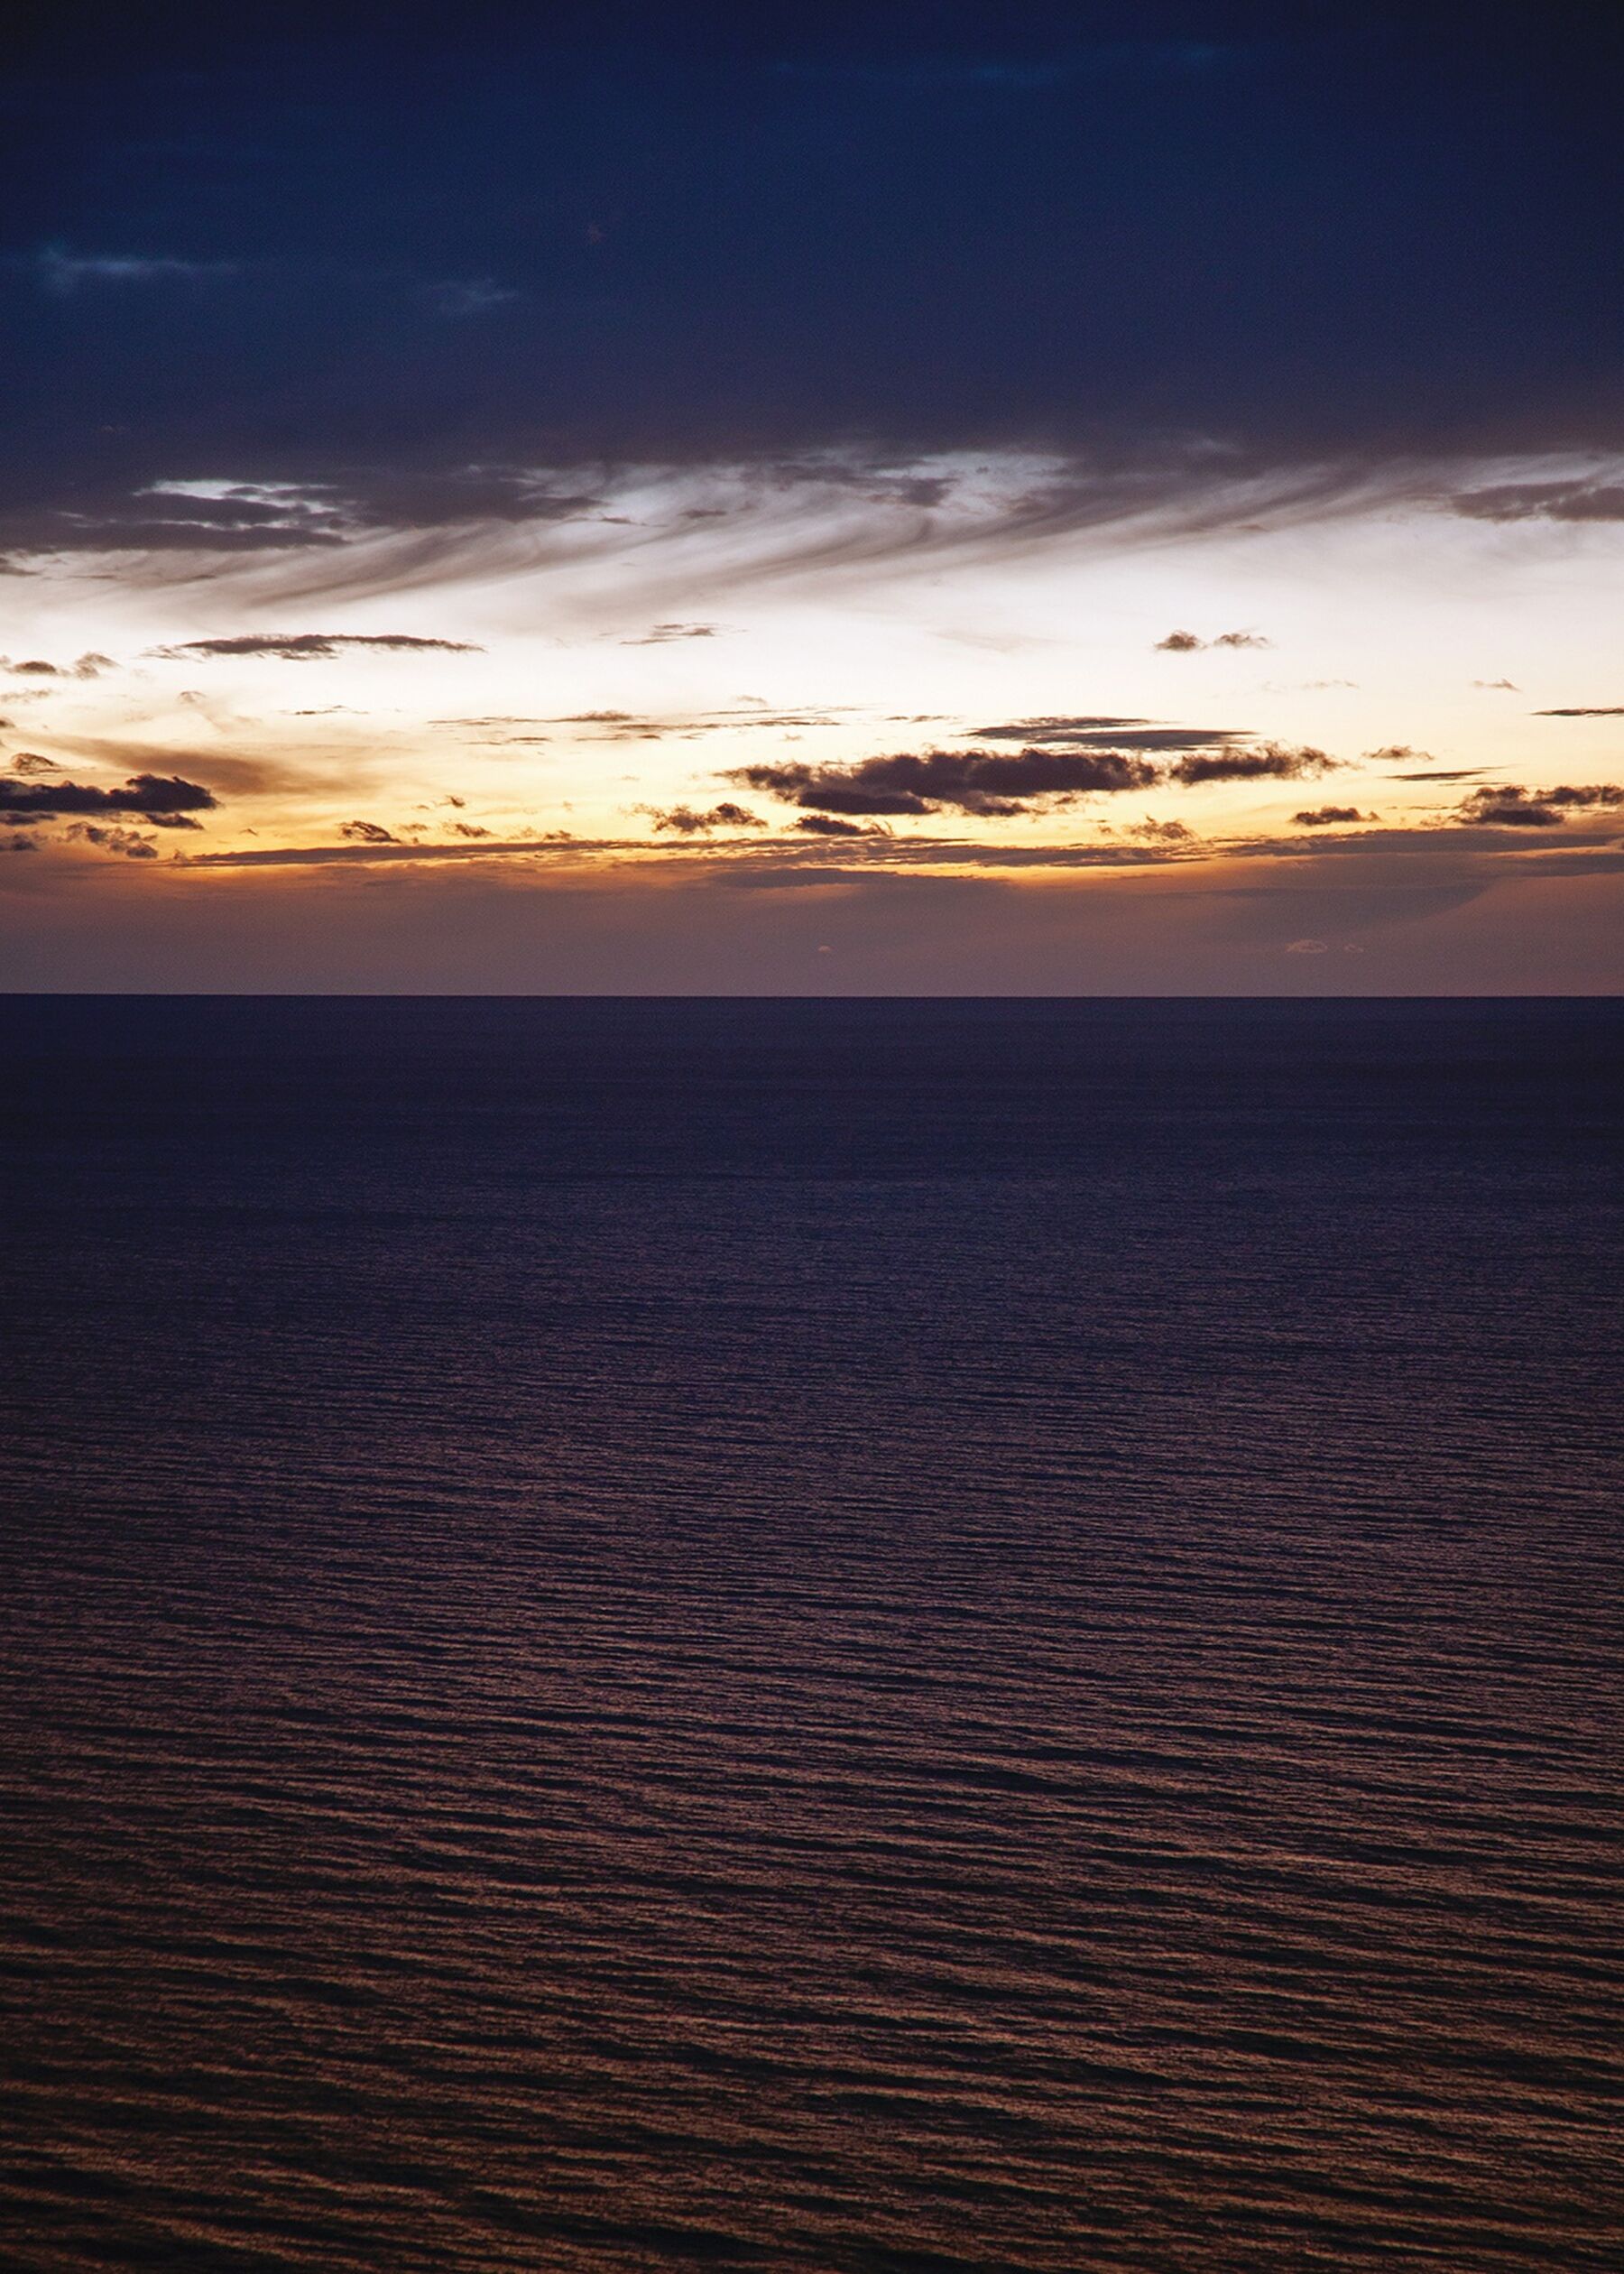 Sunset over Lake Michigan from the Emptire Bluffs, Michigan